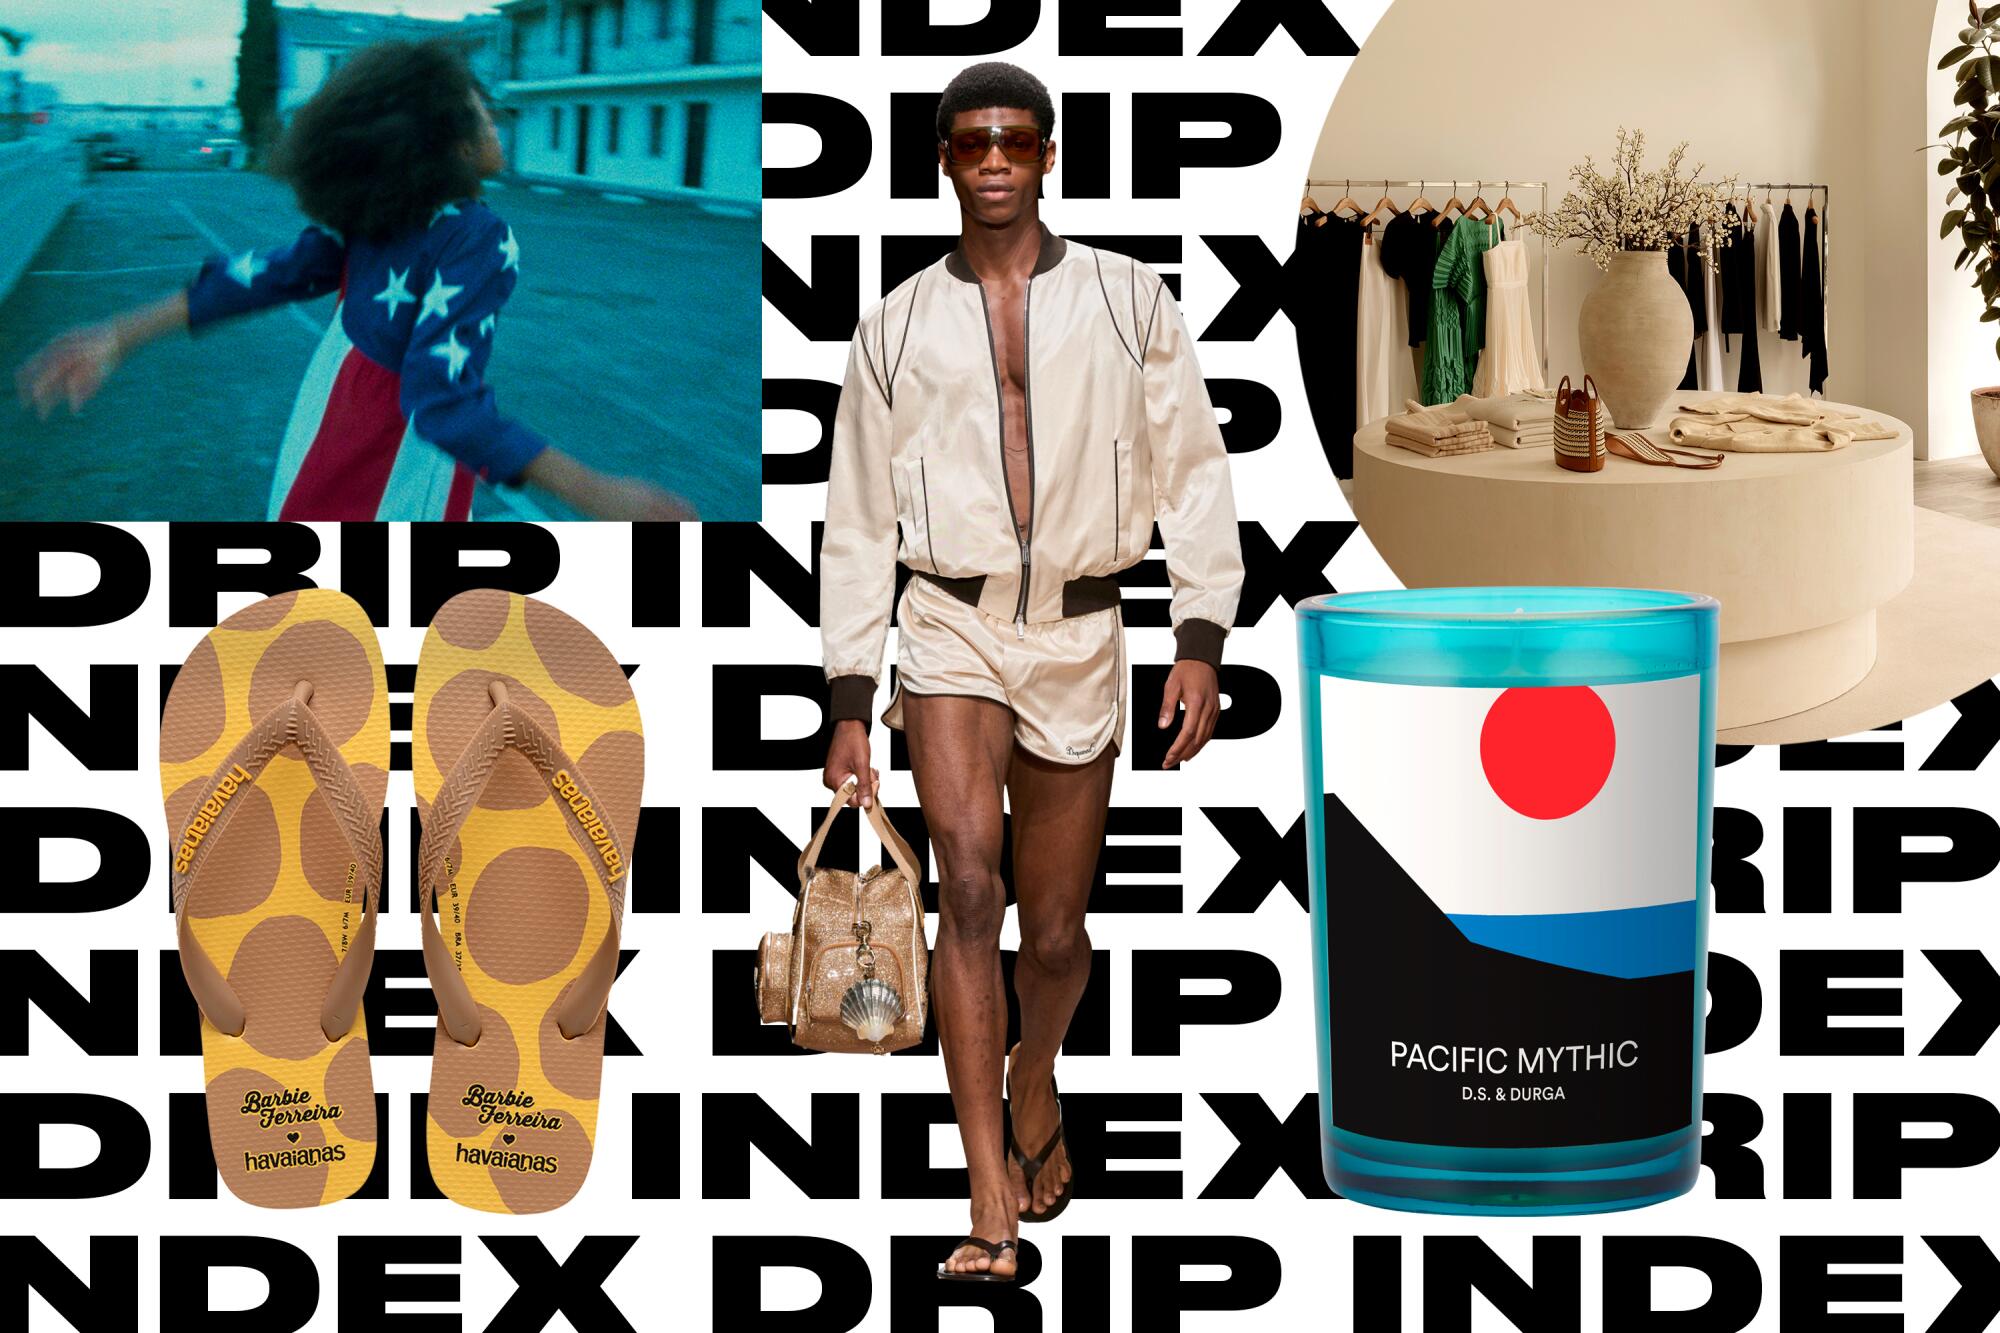 Collage featuring camo flip-flops, a model in white top and shorts, colorfully packaged candle and more